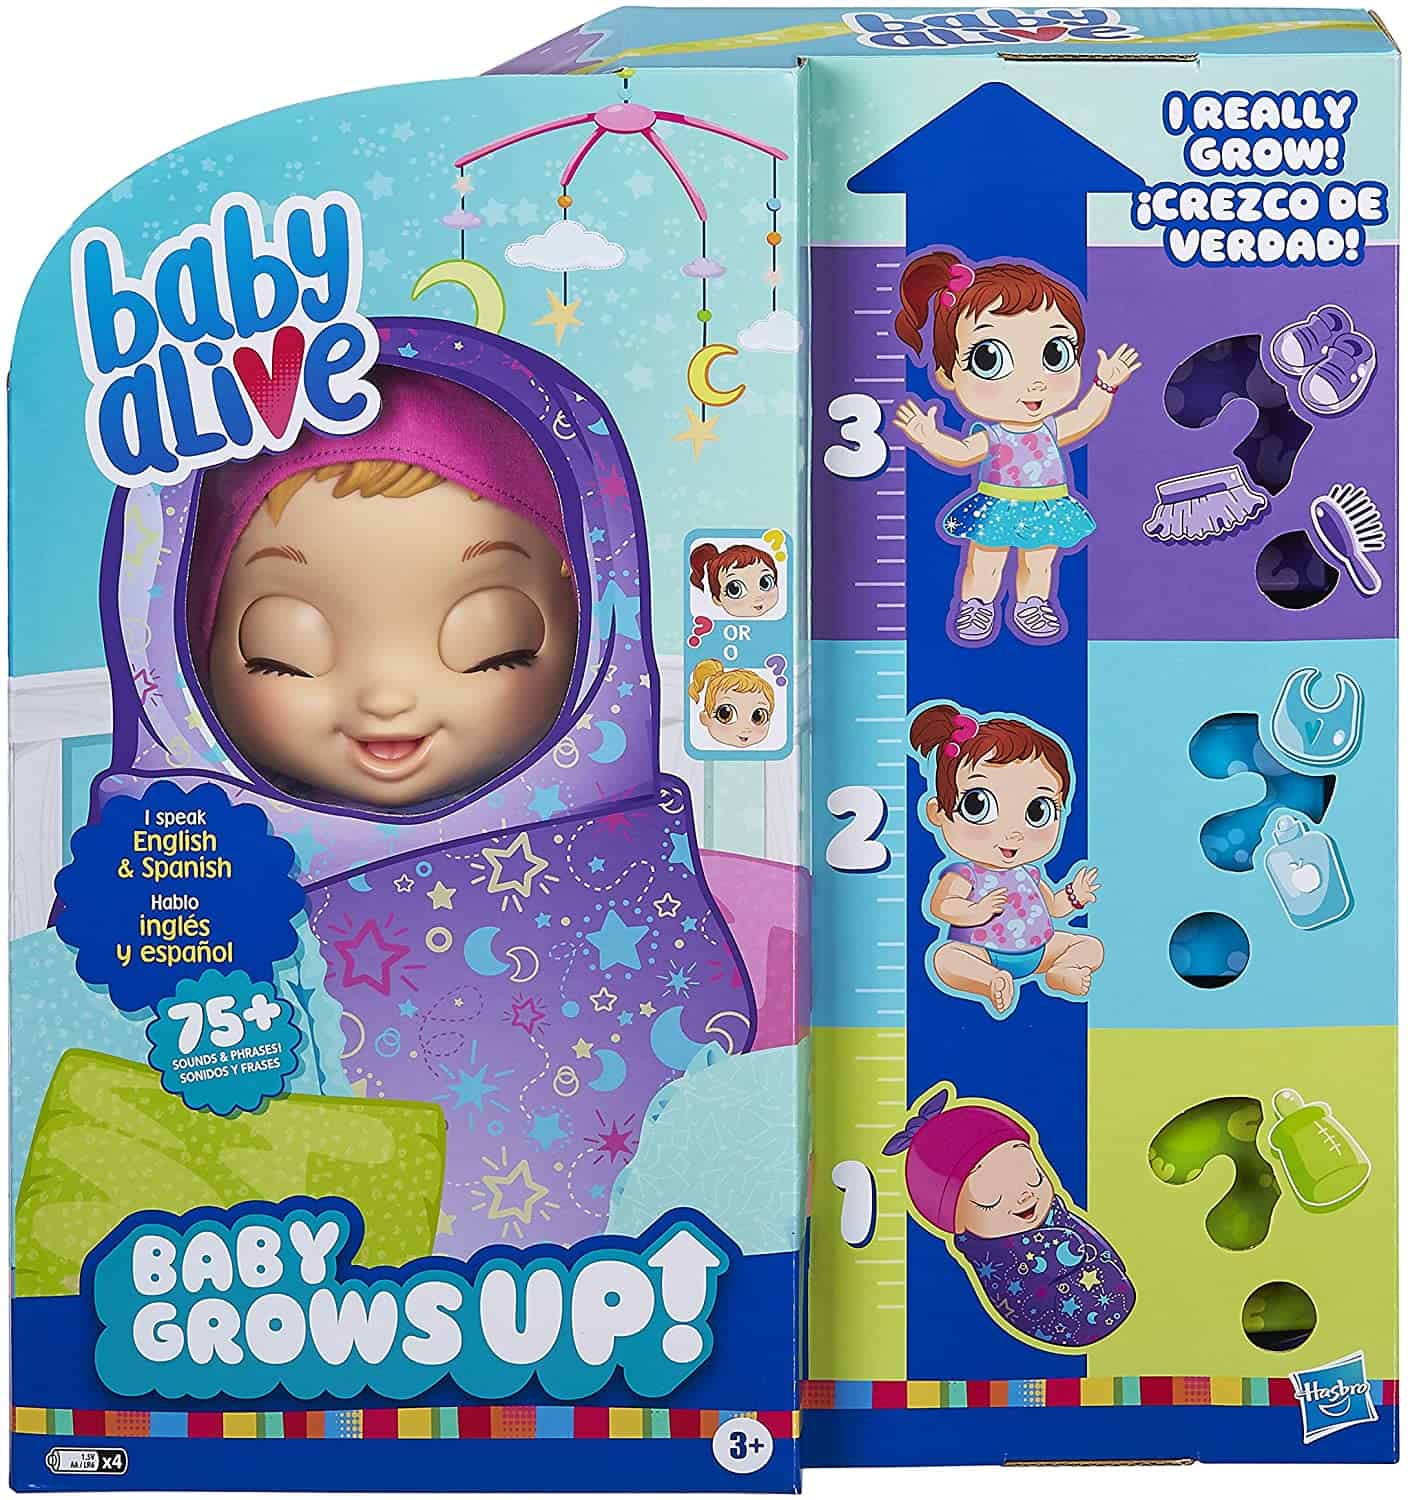 Amazon: Baby Alive Baby Grows Up Only $29.99 (Reg $59.99)